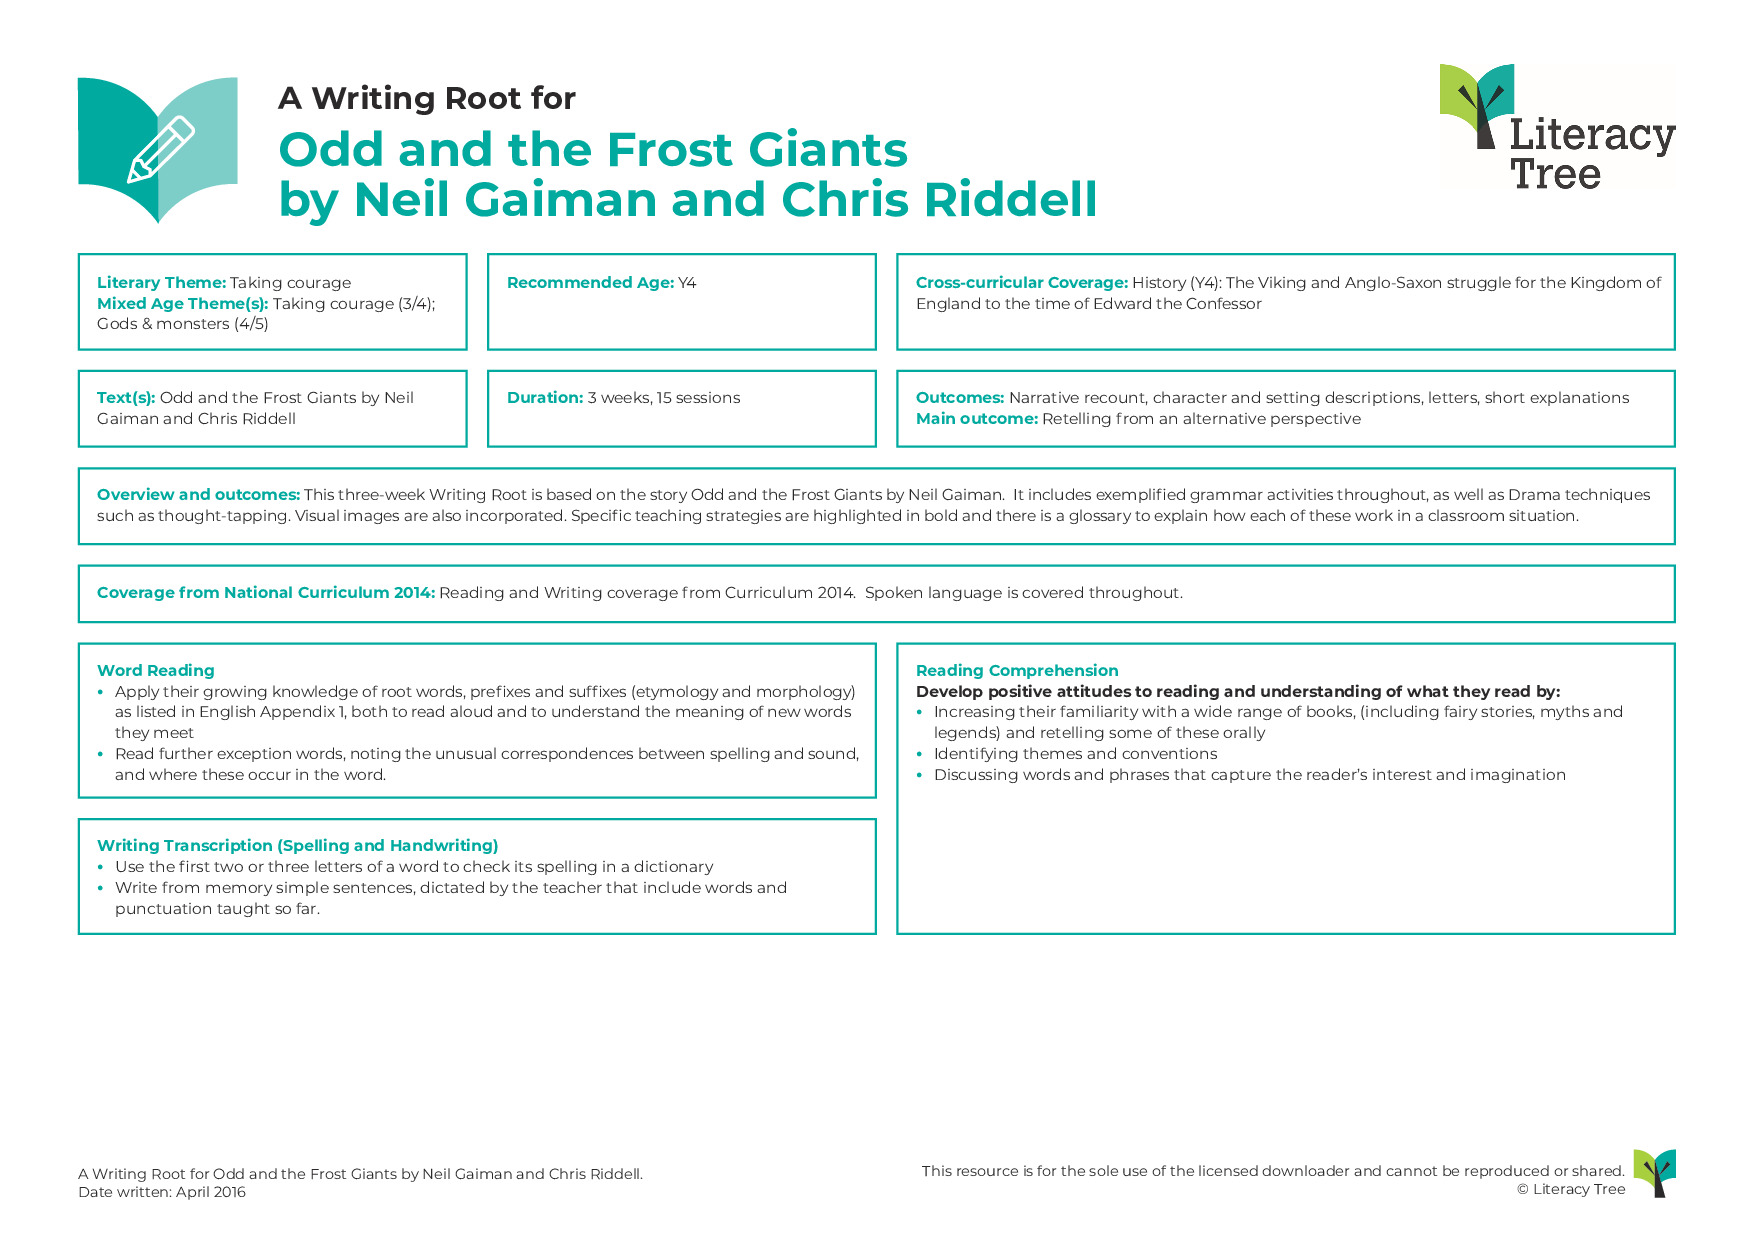 A Writing Root for Odd and the Frost Giants